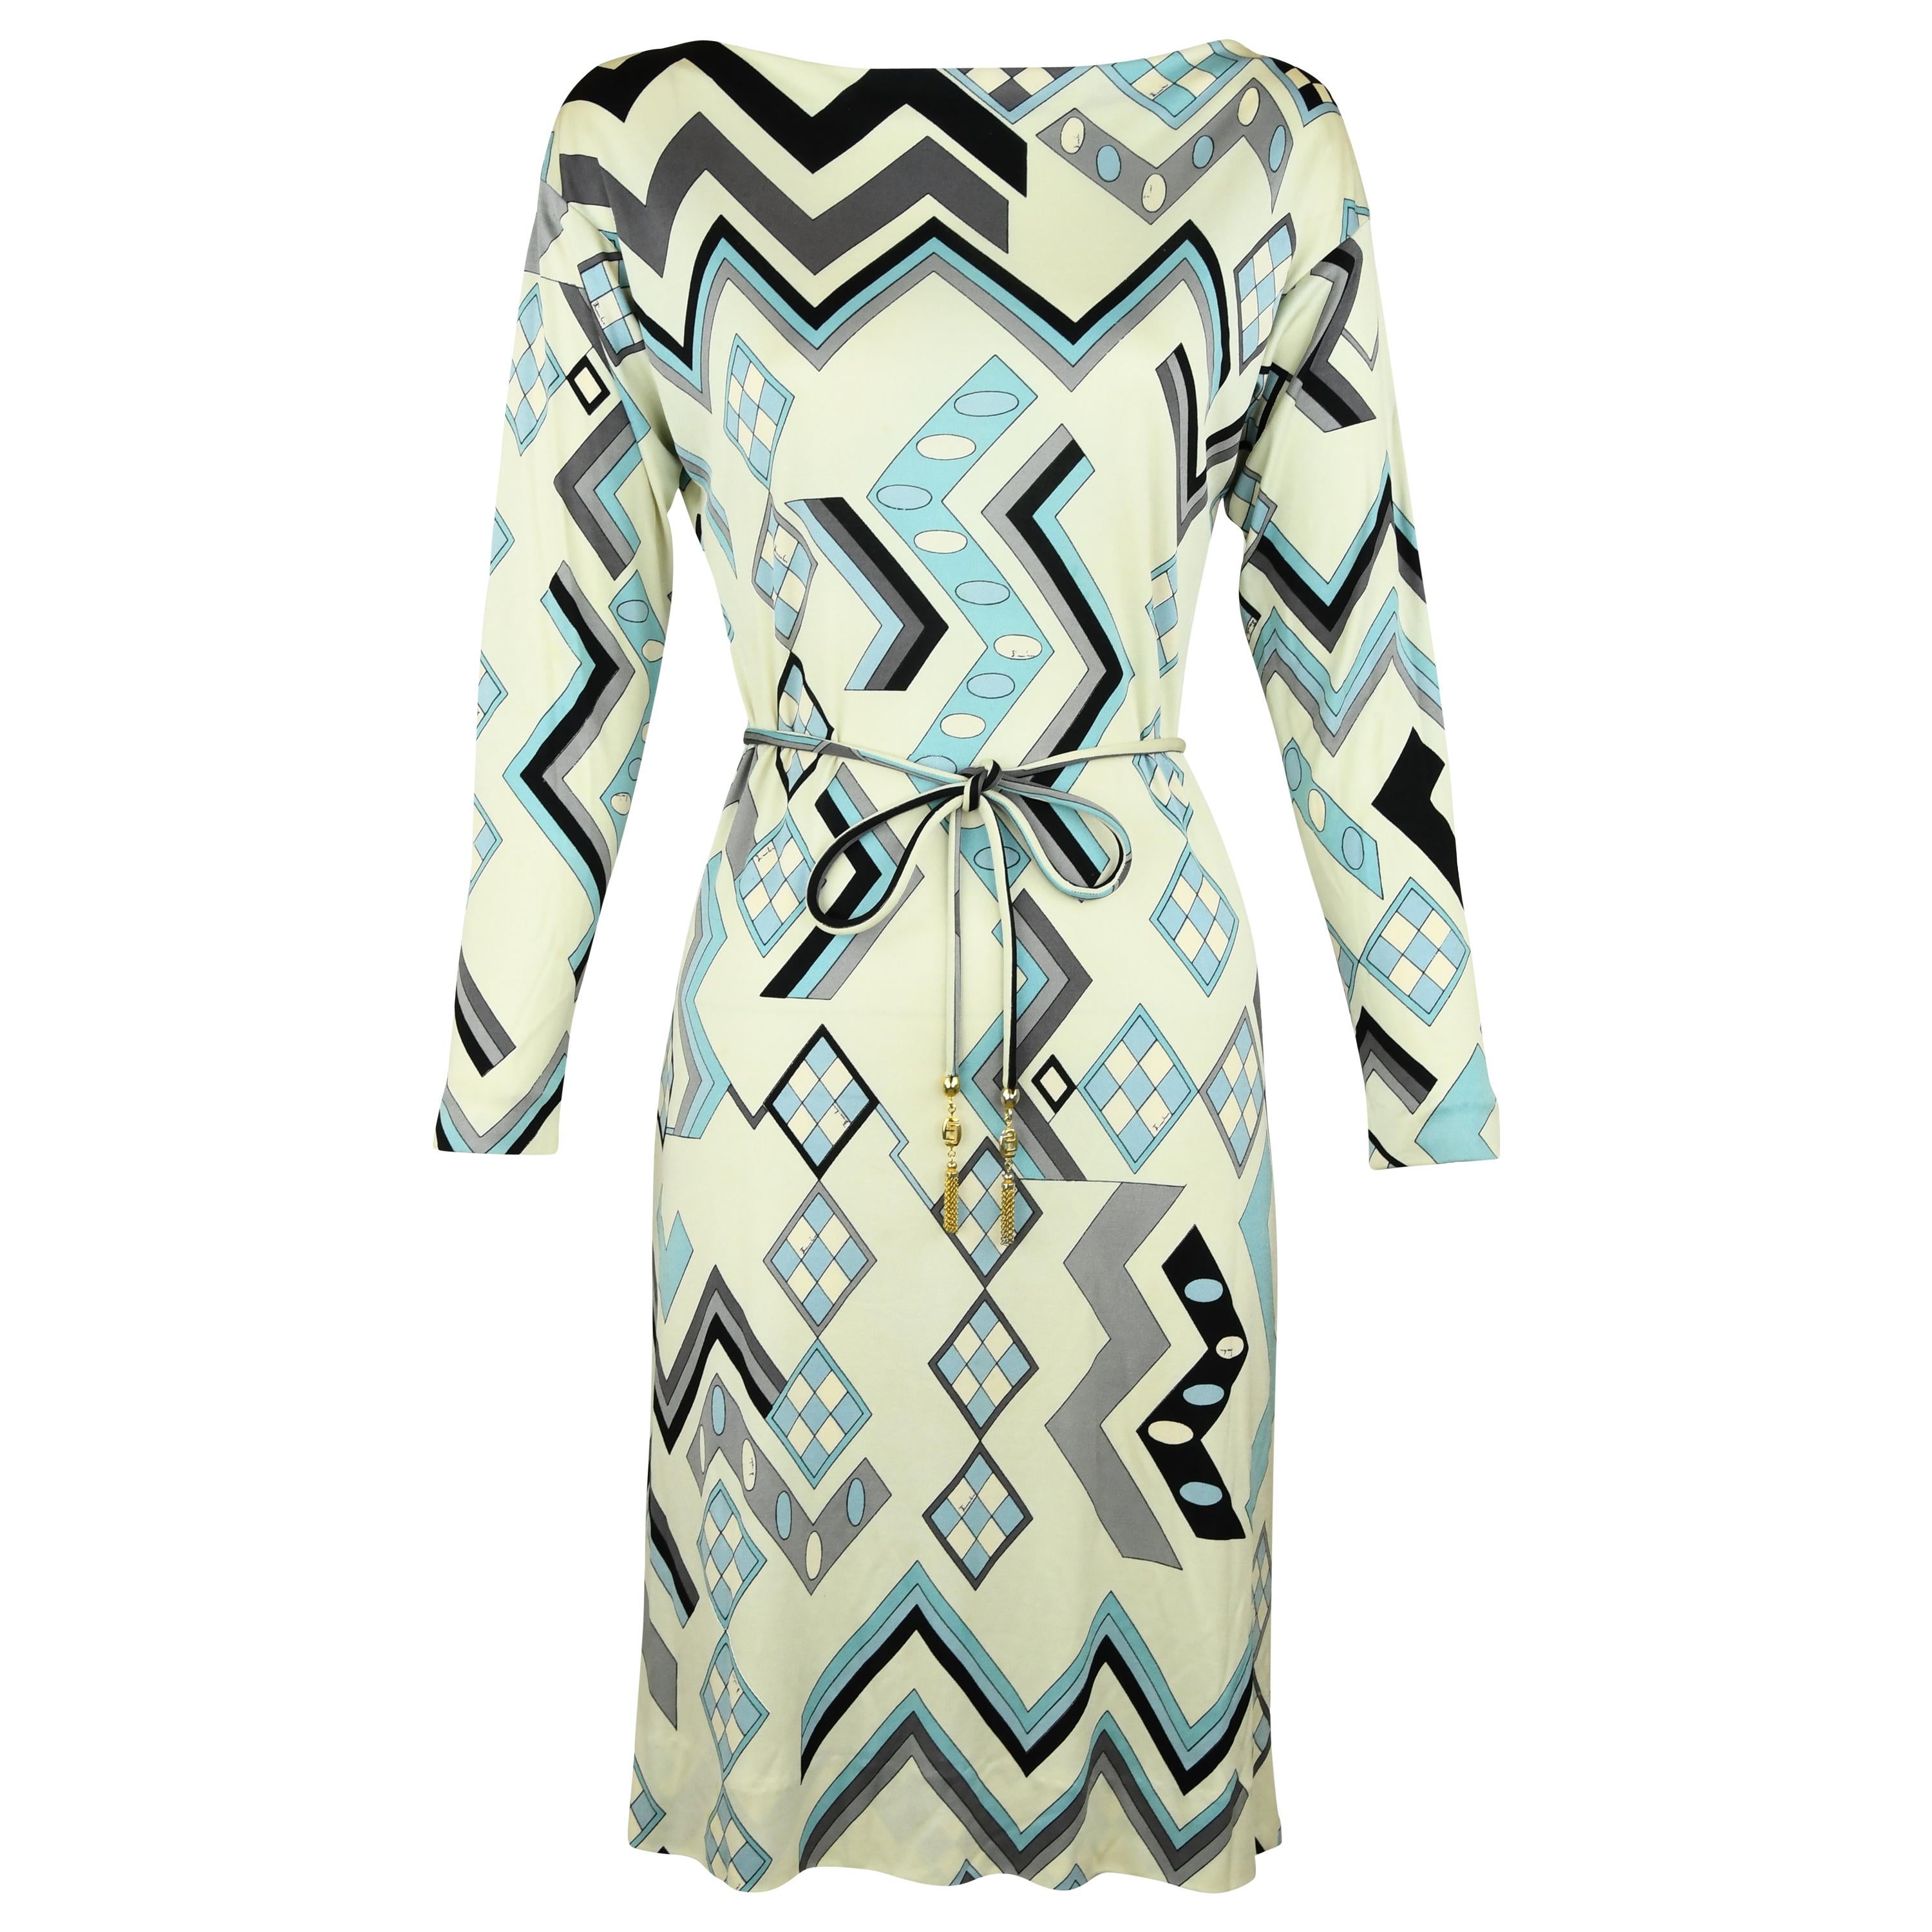 Vintage Pucci Off White, Blue & Gray Silk Jersey Dress - Size 2/4 For Sale